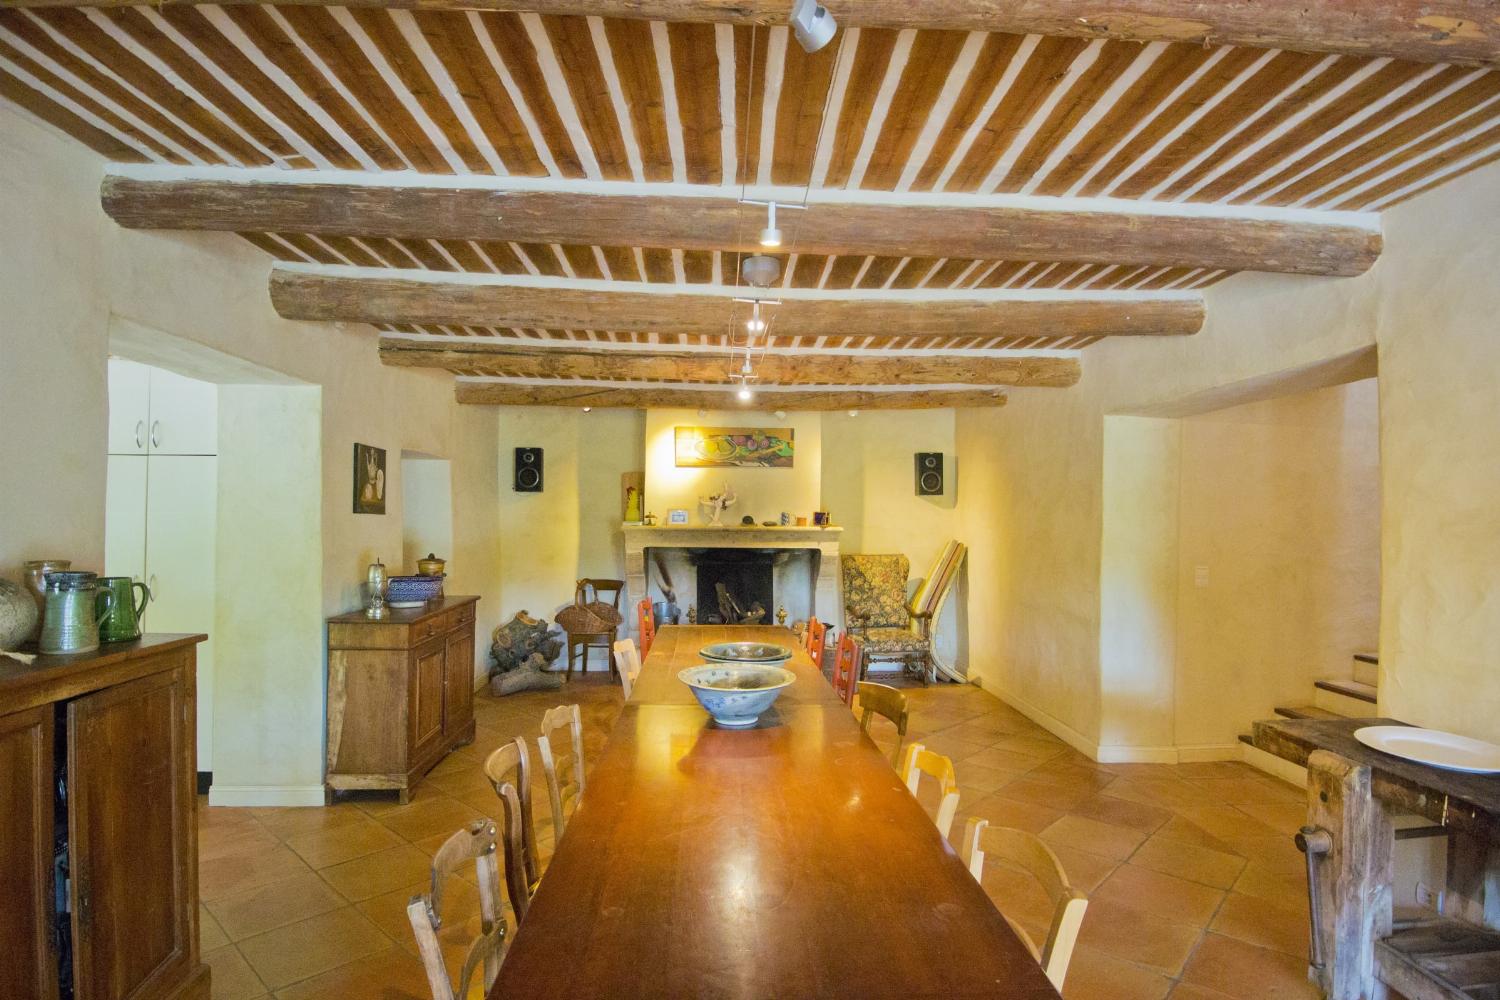 Dining room | Rental home in Provence